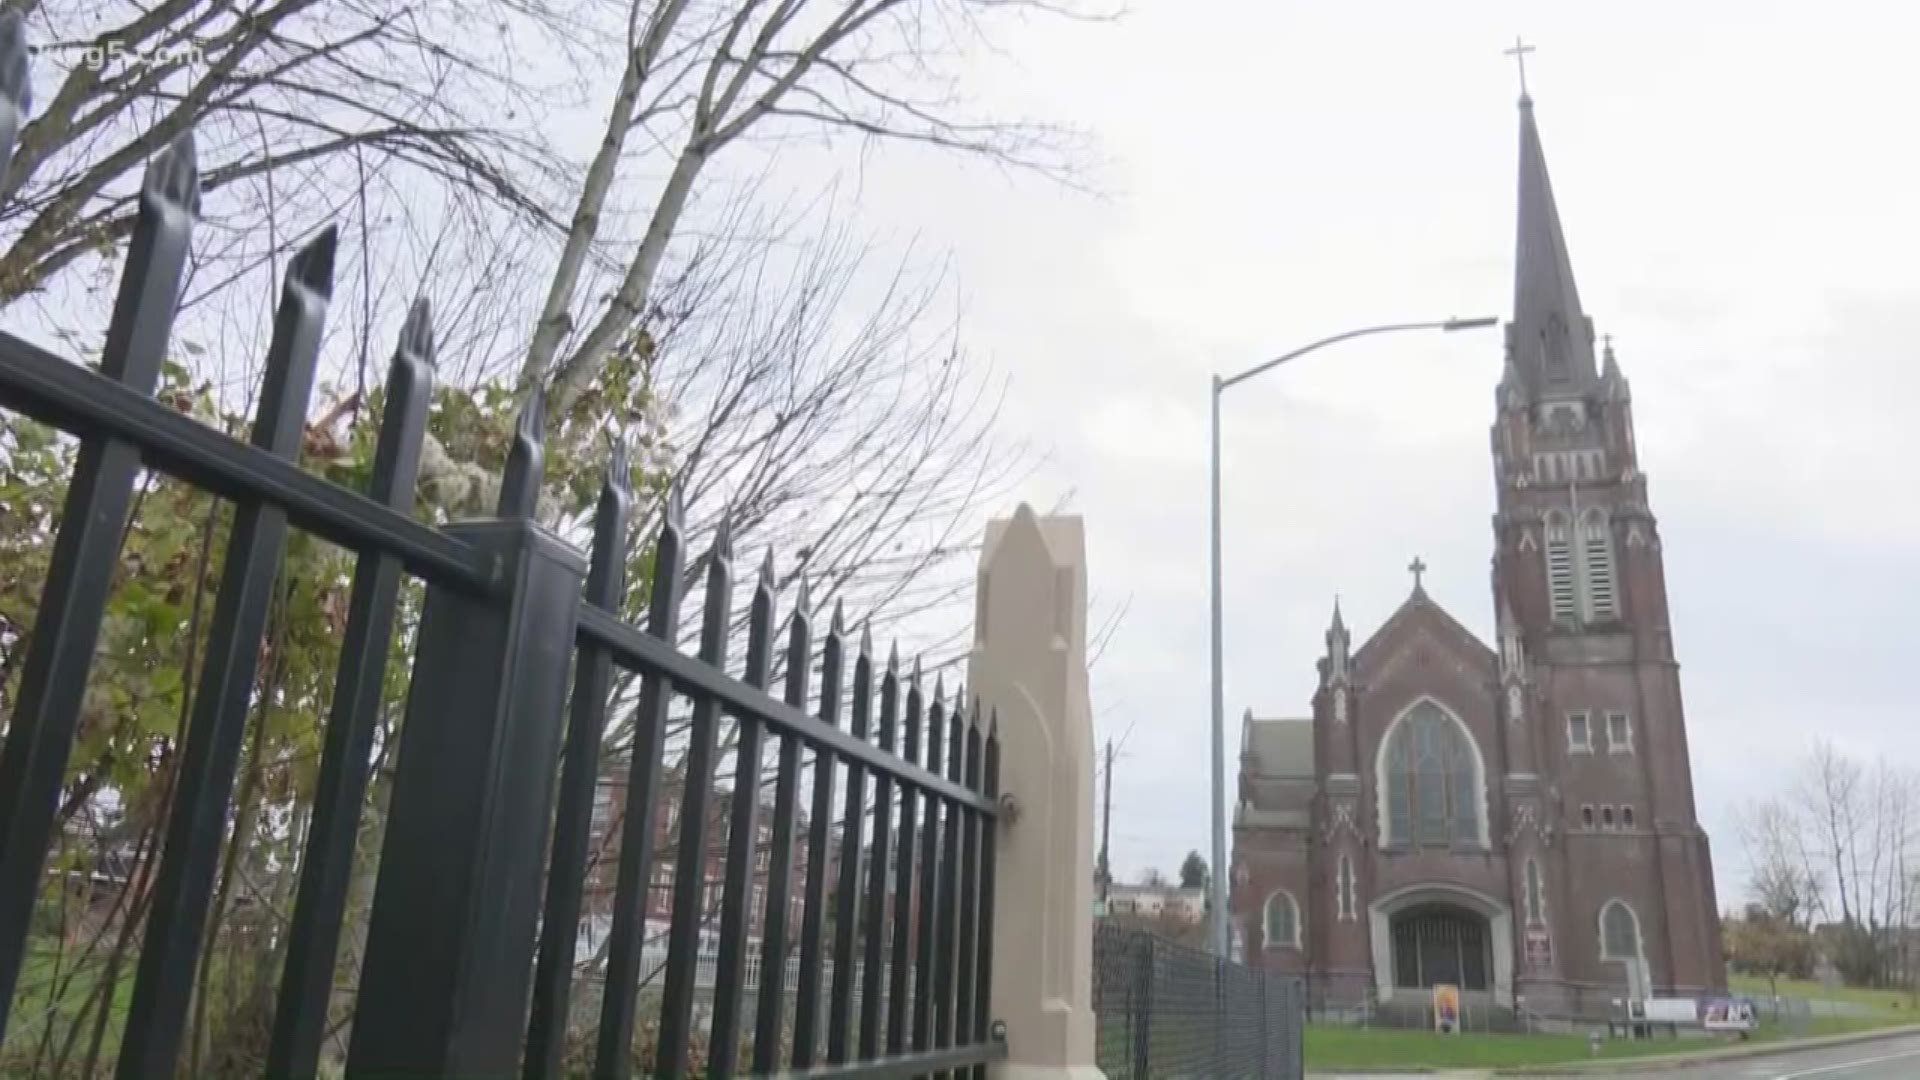 A $500,000 pledge from the Jack and Angela Connelly Family Foundation seeks to help repair and reopen the historic Holy Rosary Catholic Church in Tacoma.